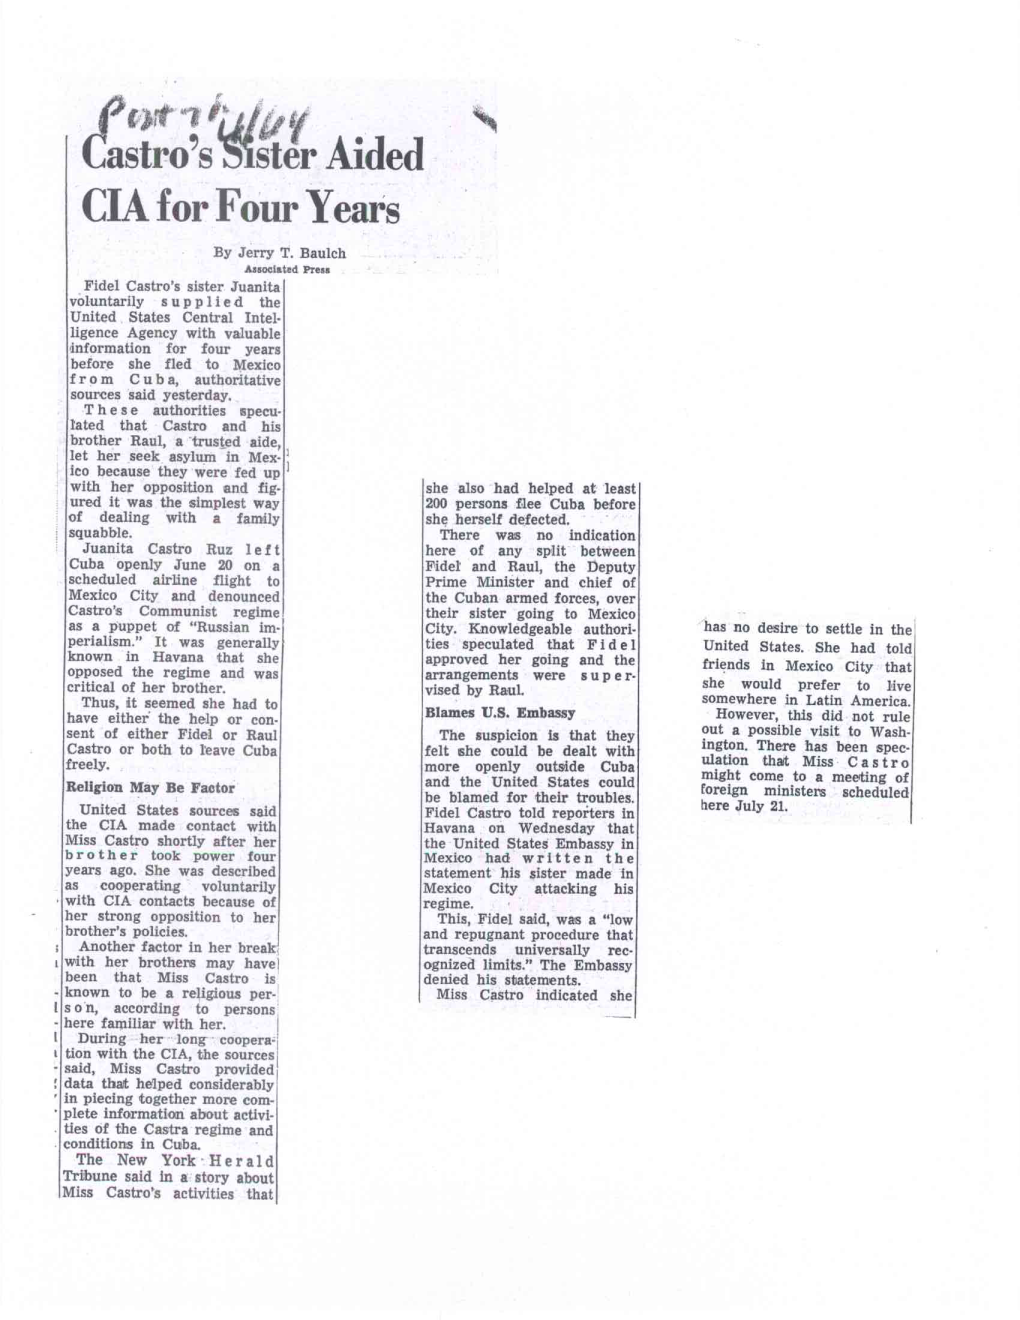 Ot Ter Stro's -Sister Aided N44, CIA for Four Years